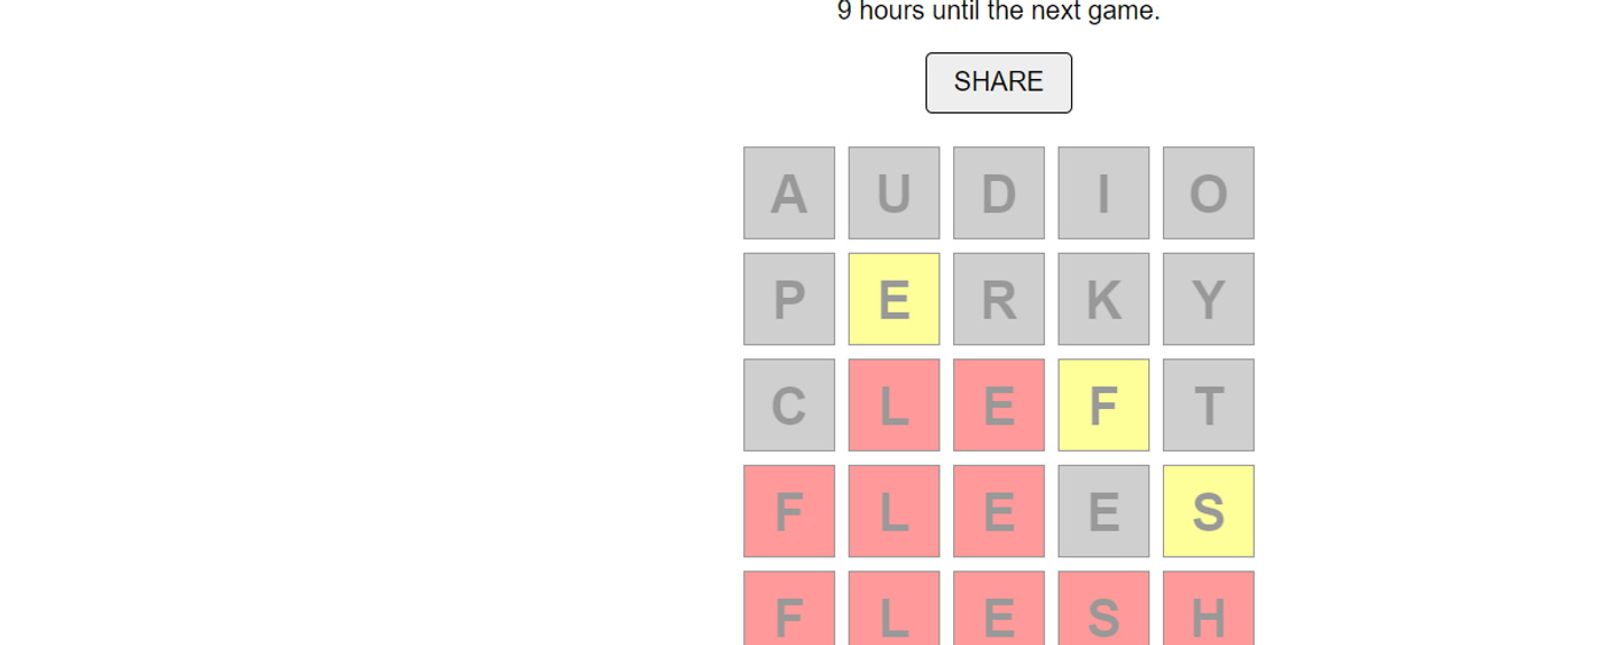 Image showing a grid in play from Words With Friends